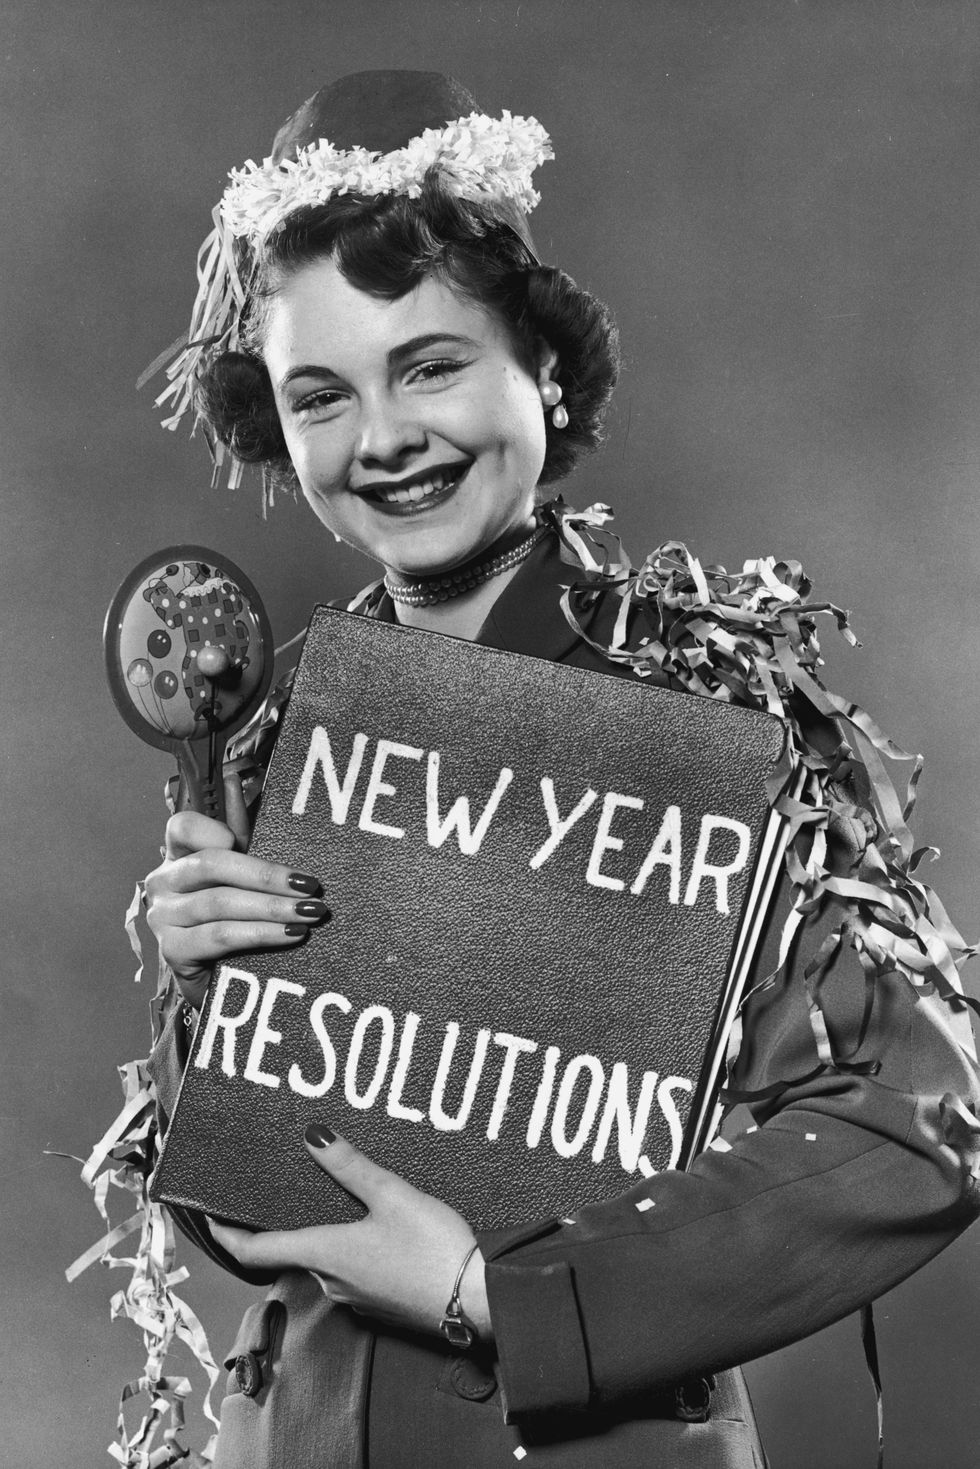 new years traditions resolutions